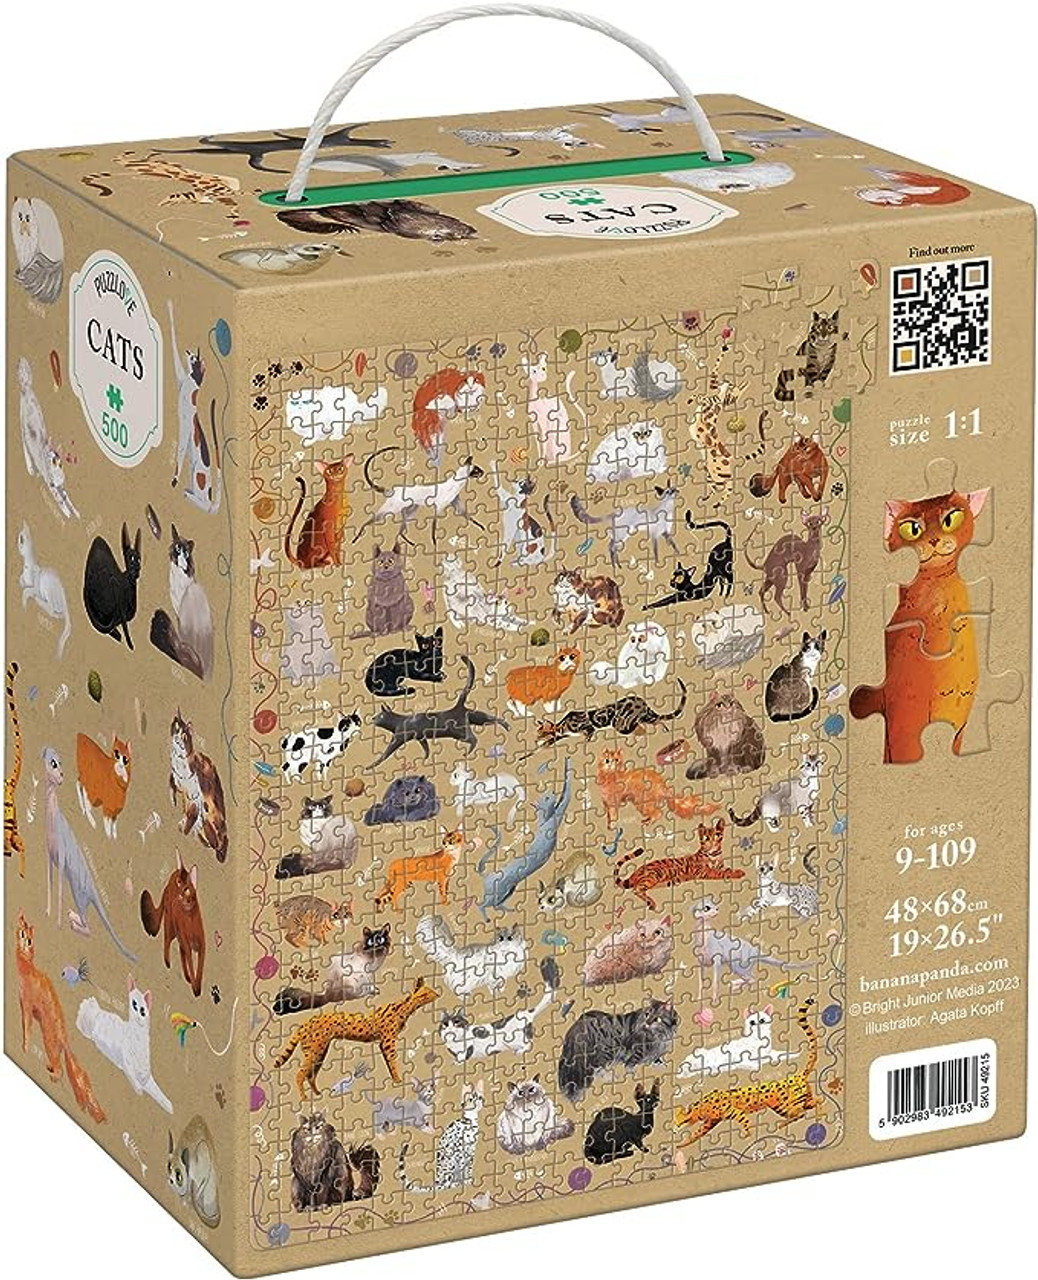 Puzzlove Cats 500 Pc.